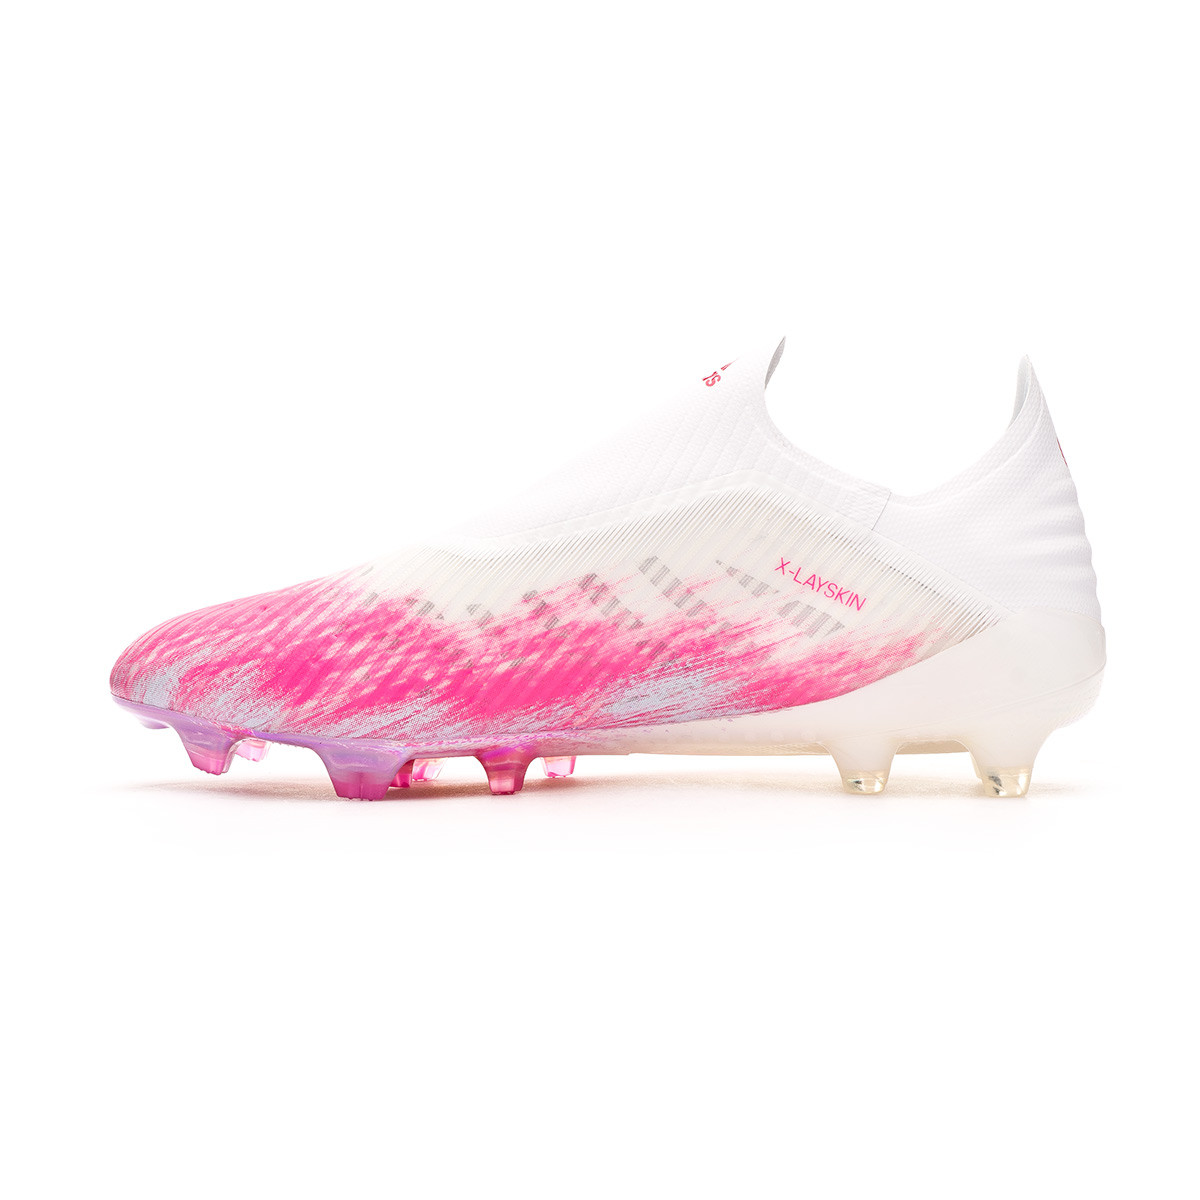 white and pink football boots